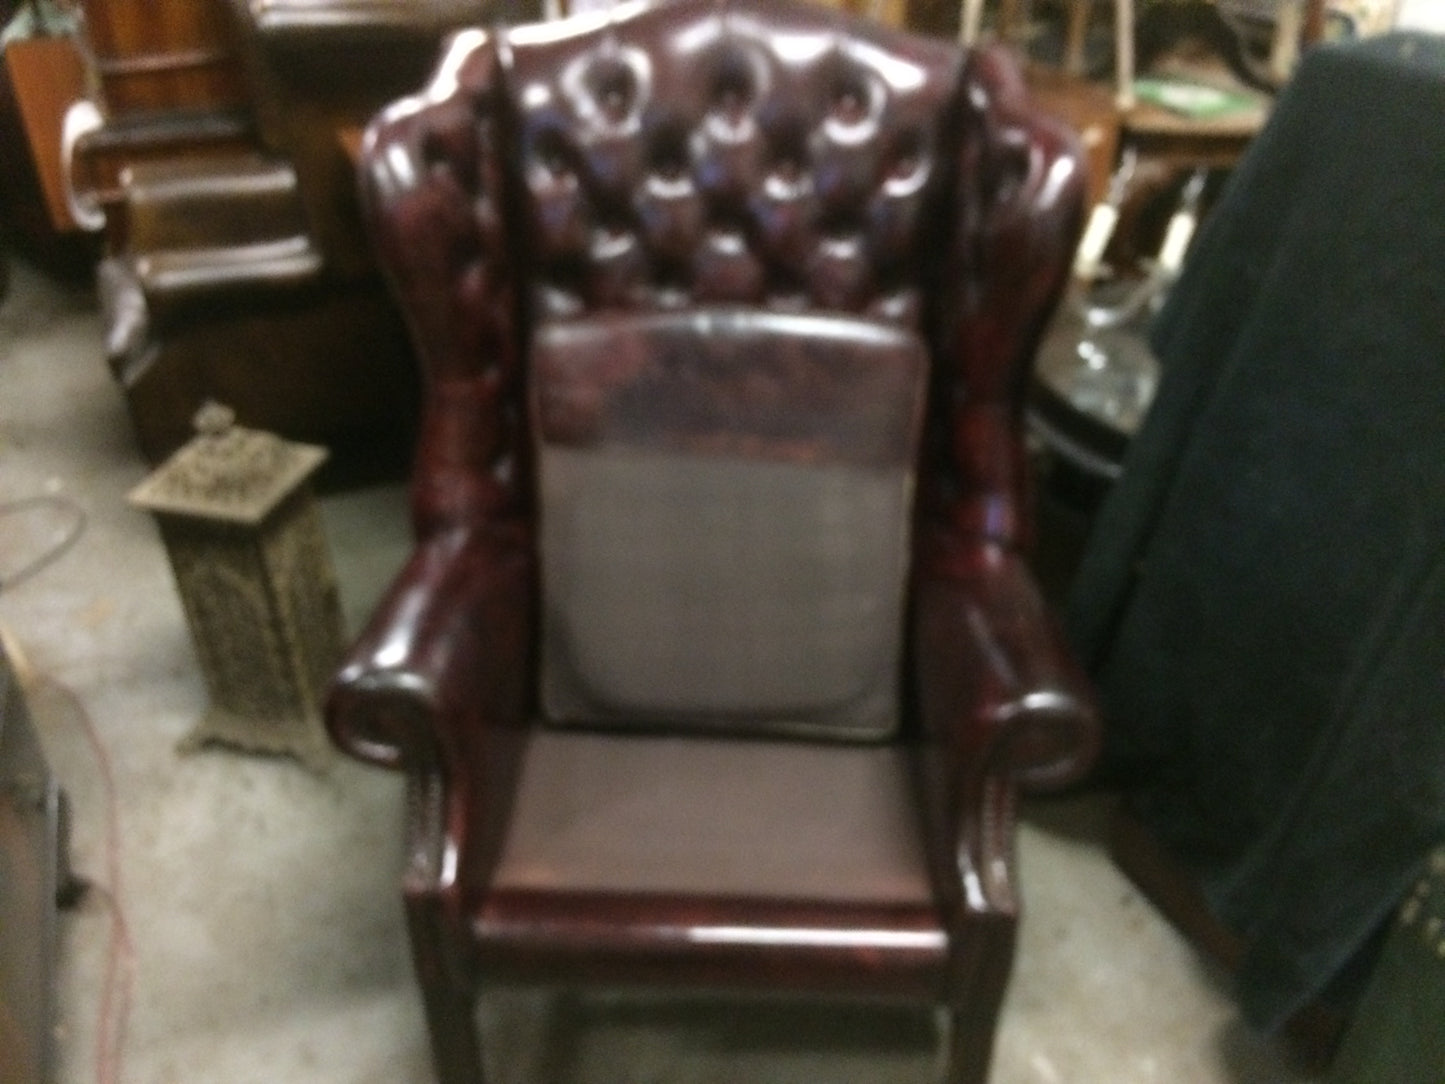 Beautiful Vintage Hand Dyed Dark Red Leather Chesterfield Wing Back Armchair